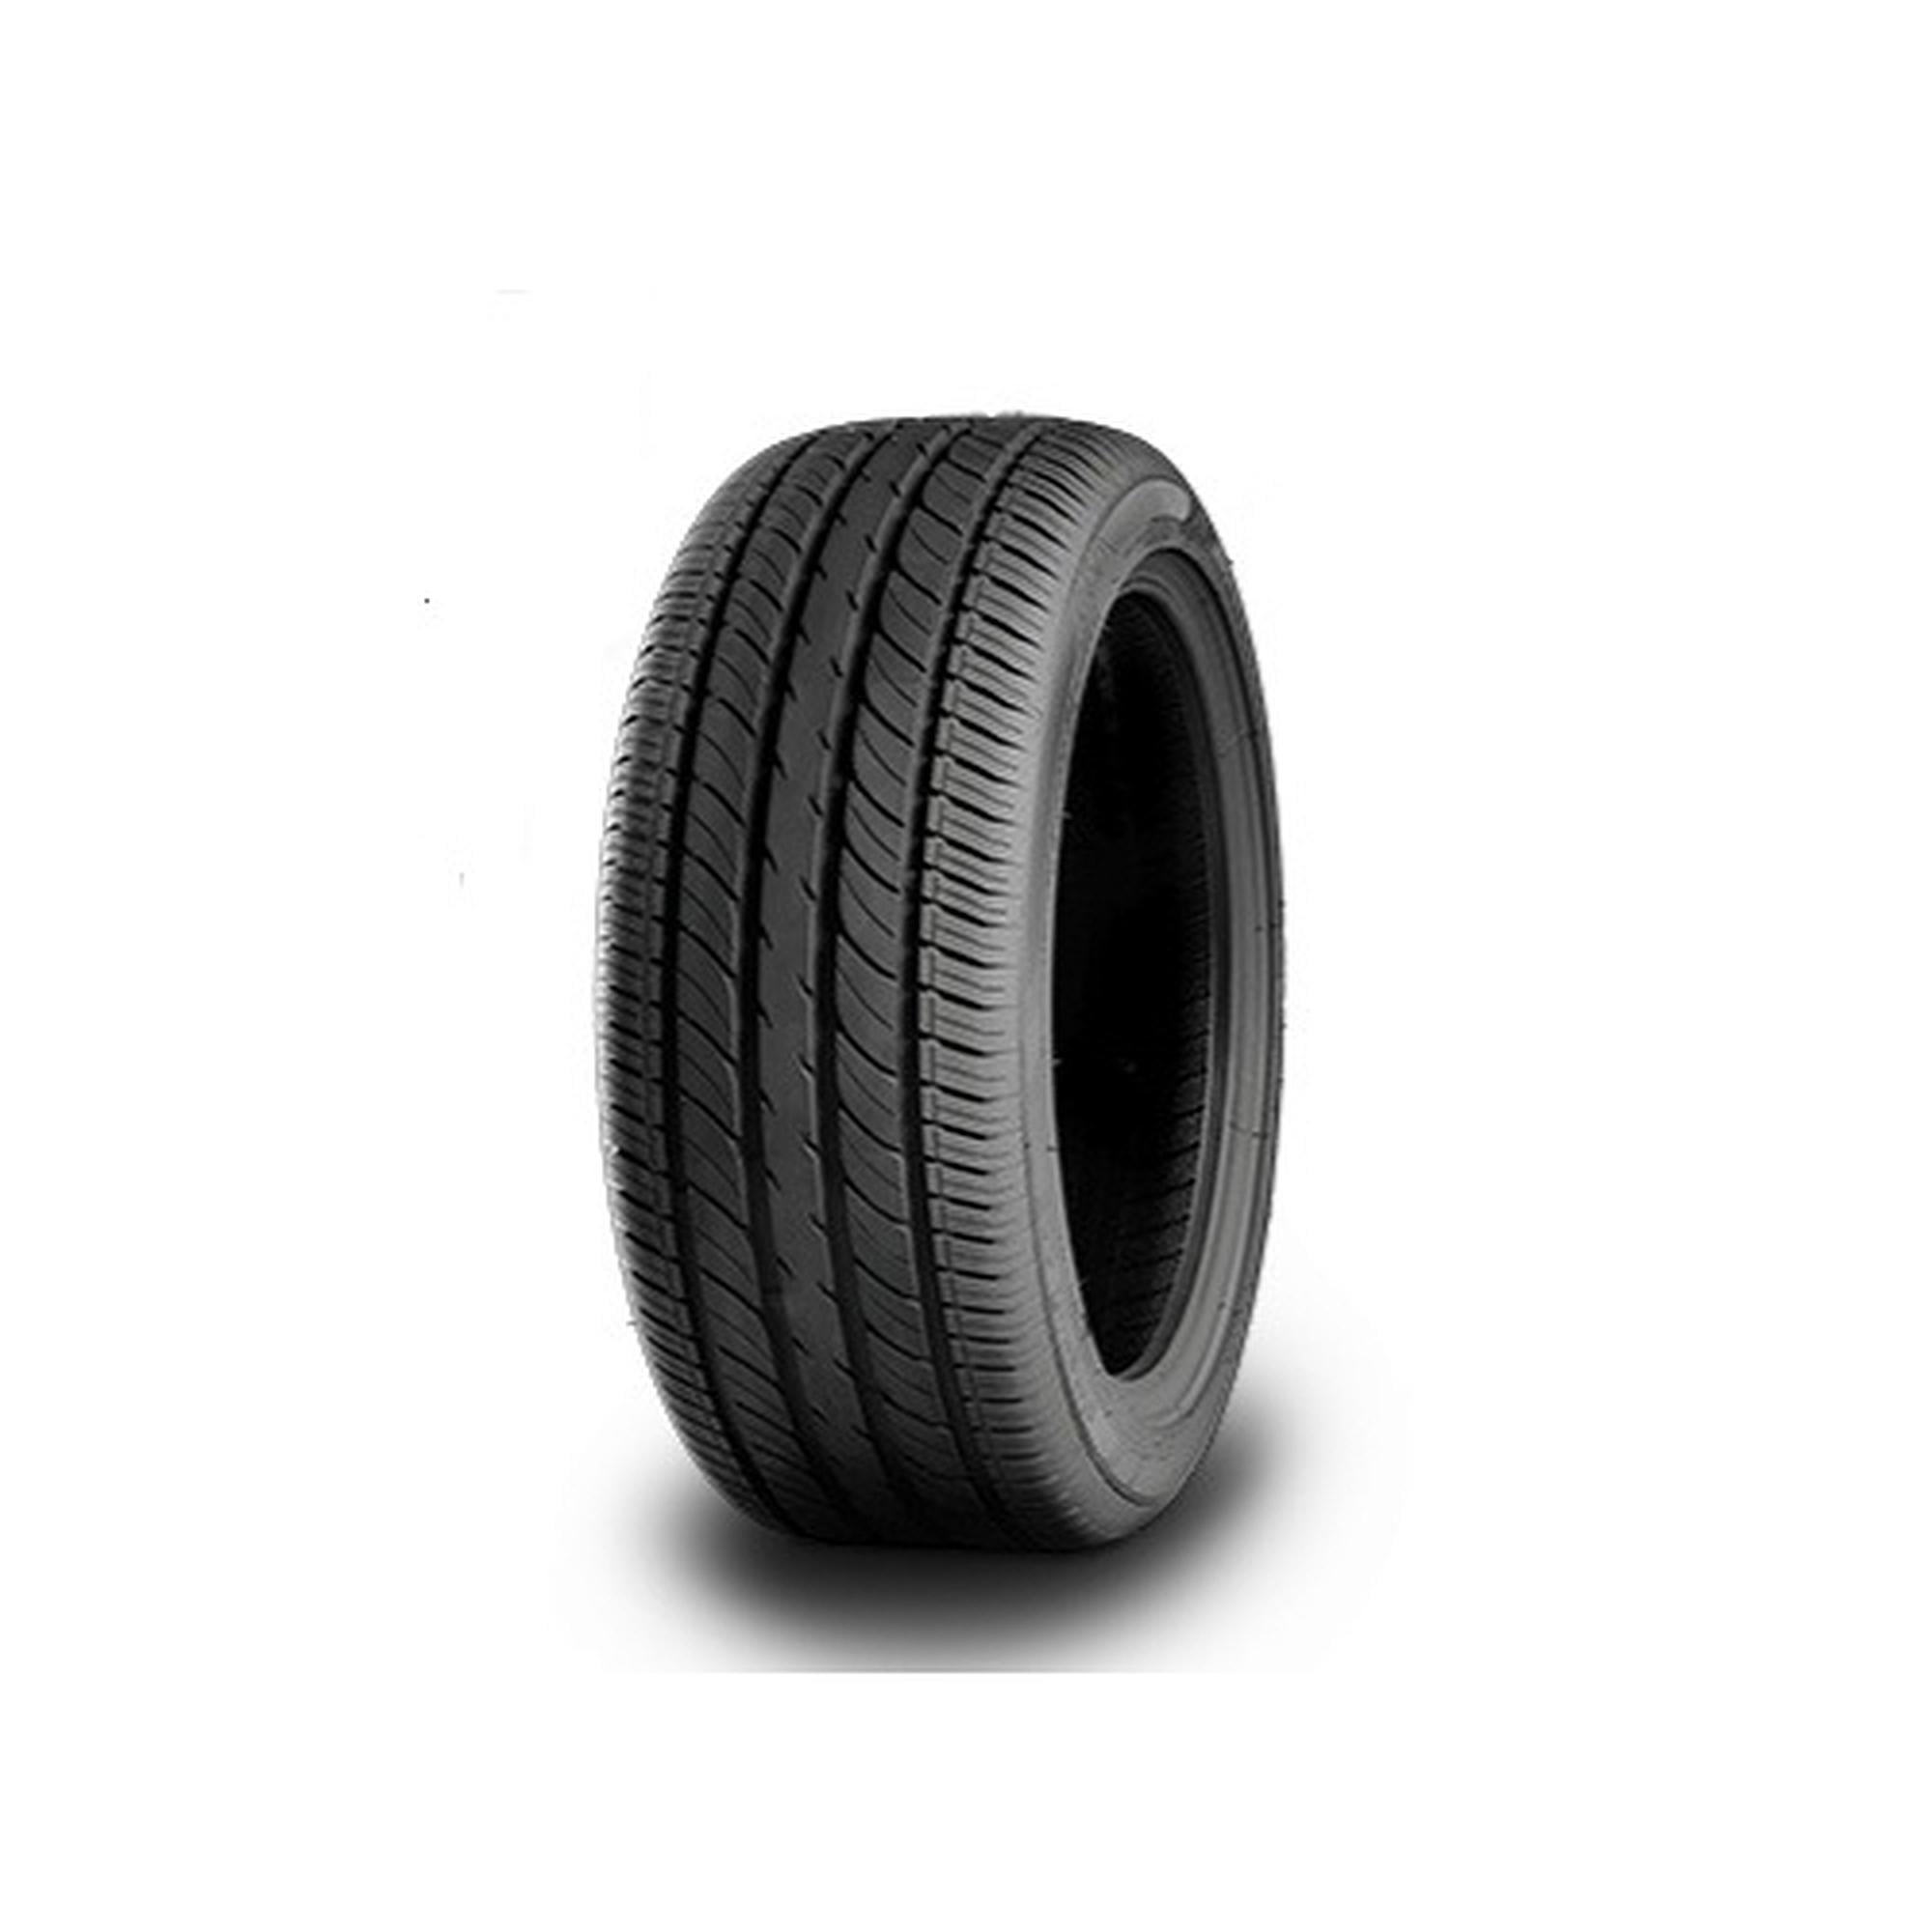 Waterfall Eco Dynamic Summer 165/70R13 Passenger 79T Tire